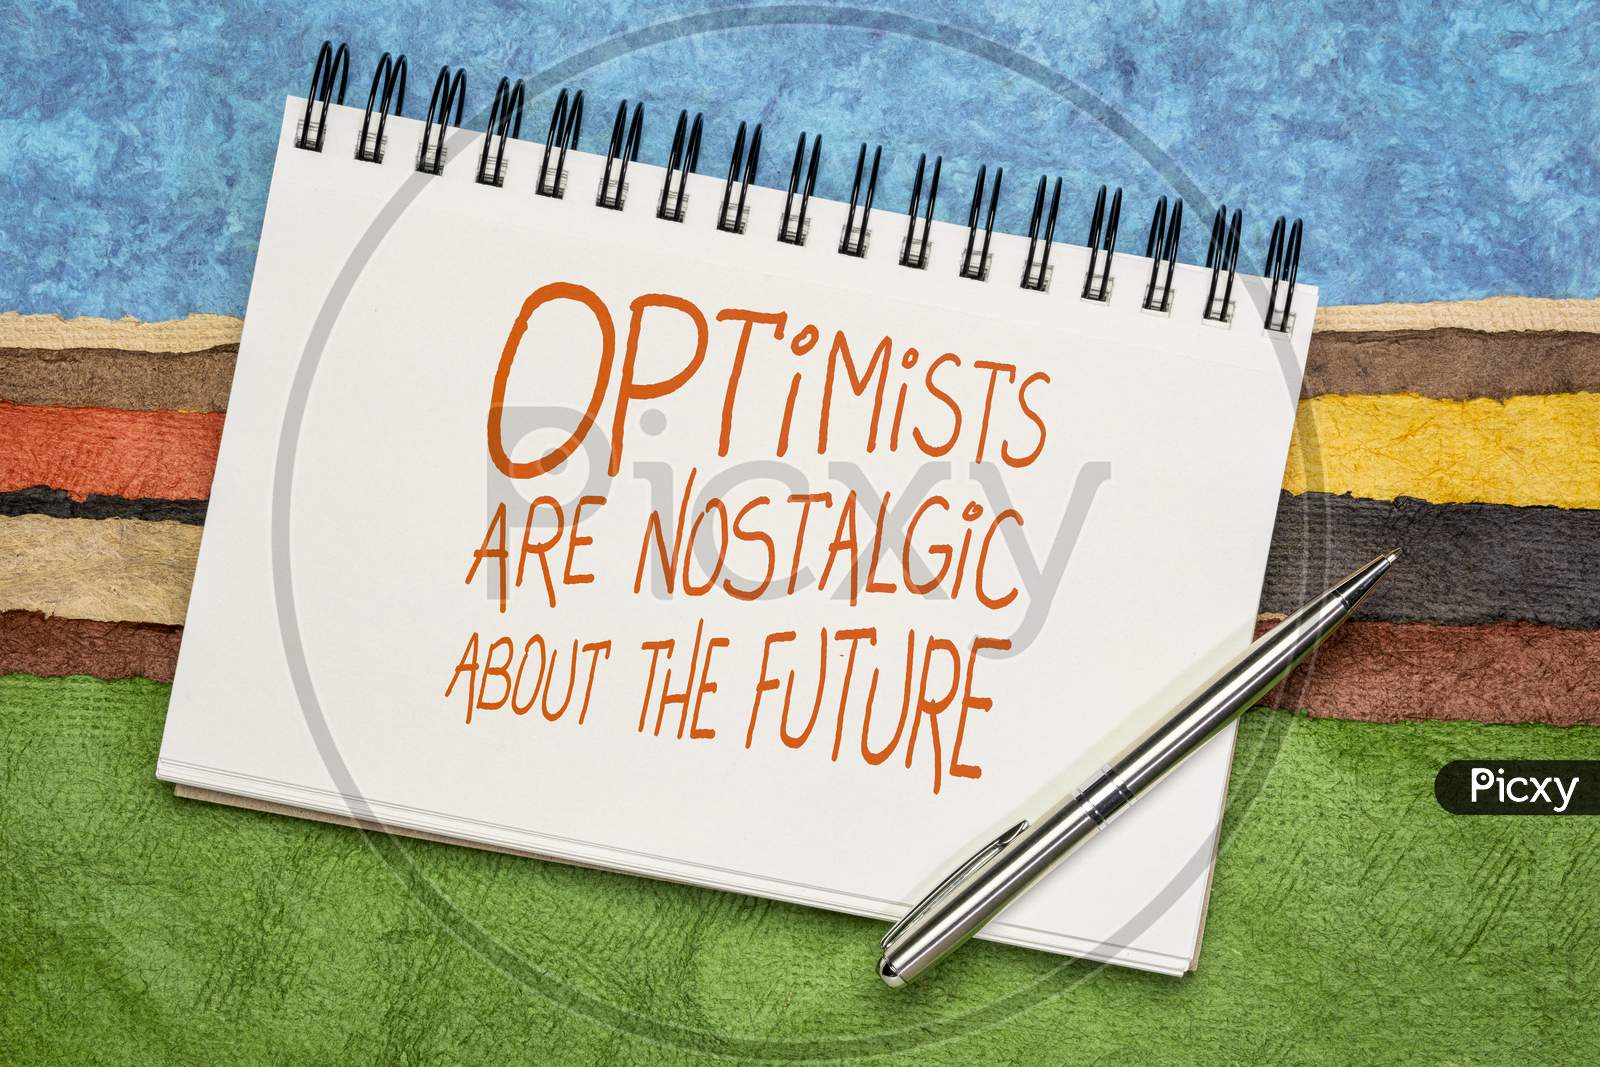 Optimists Are Nostalgic About The Future  Inspirational Quote - Handwriting In A Sketchbook Against Colorful Abstract Landscape.  Positivity Concept.